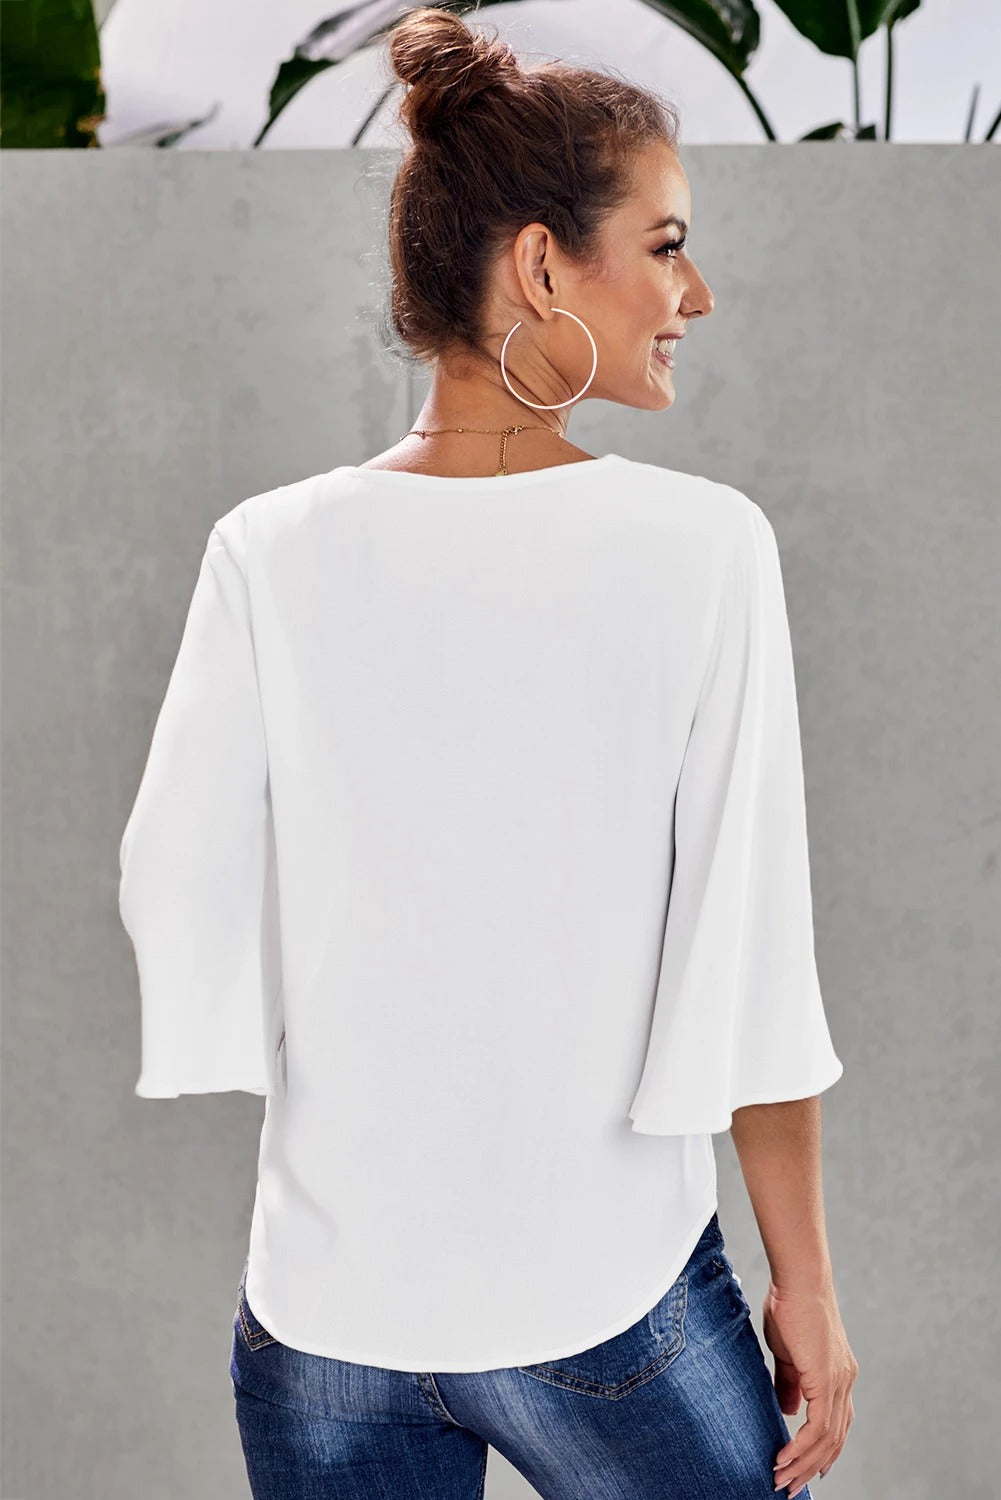 Blouse Femme Blanche Nouer Manches Flare Bouton